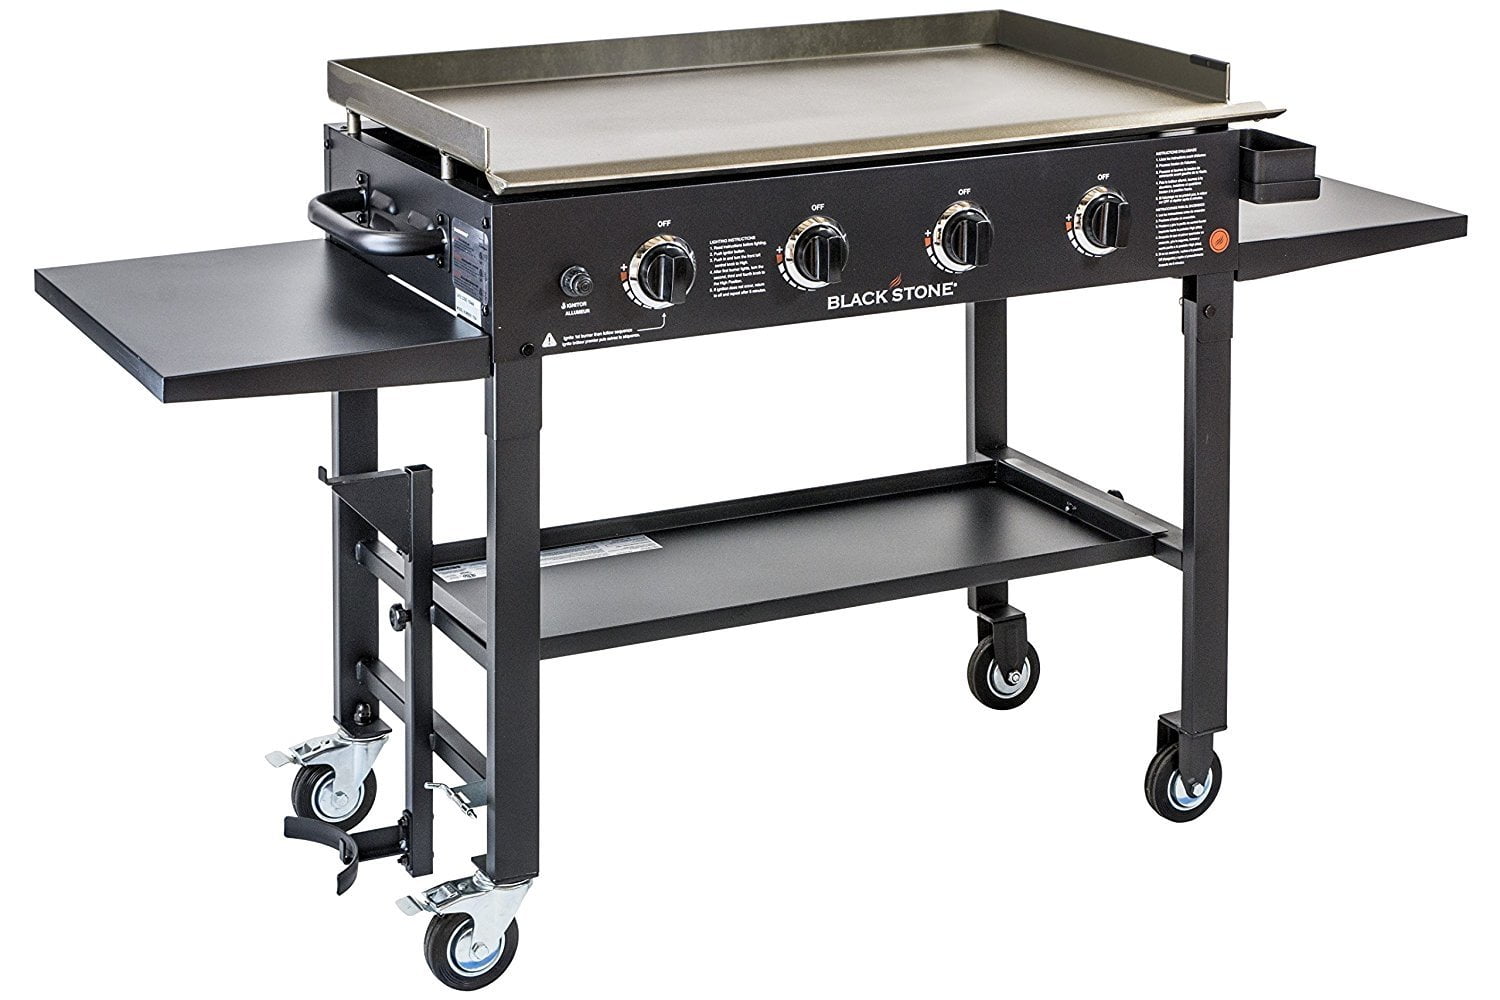 4-burner Blackstone 36 inch Outdoor Flat Top Gas Grill Griddle Station ... 